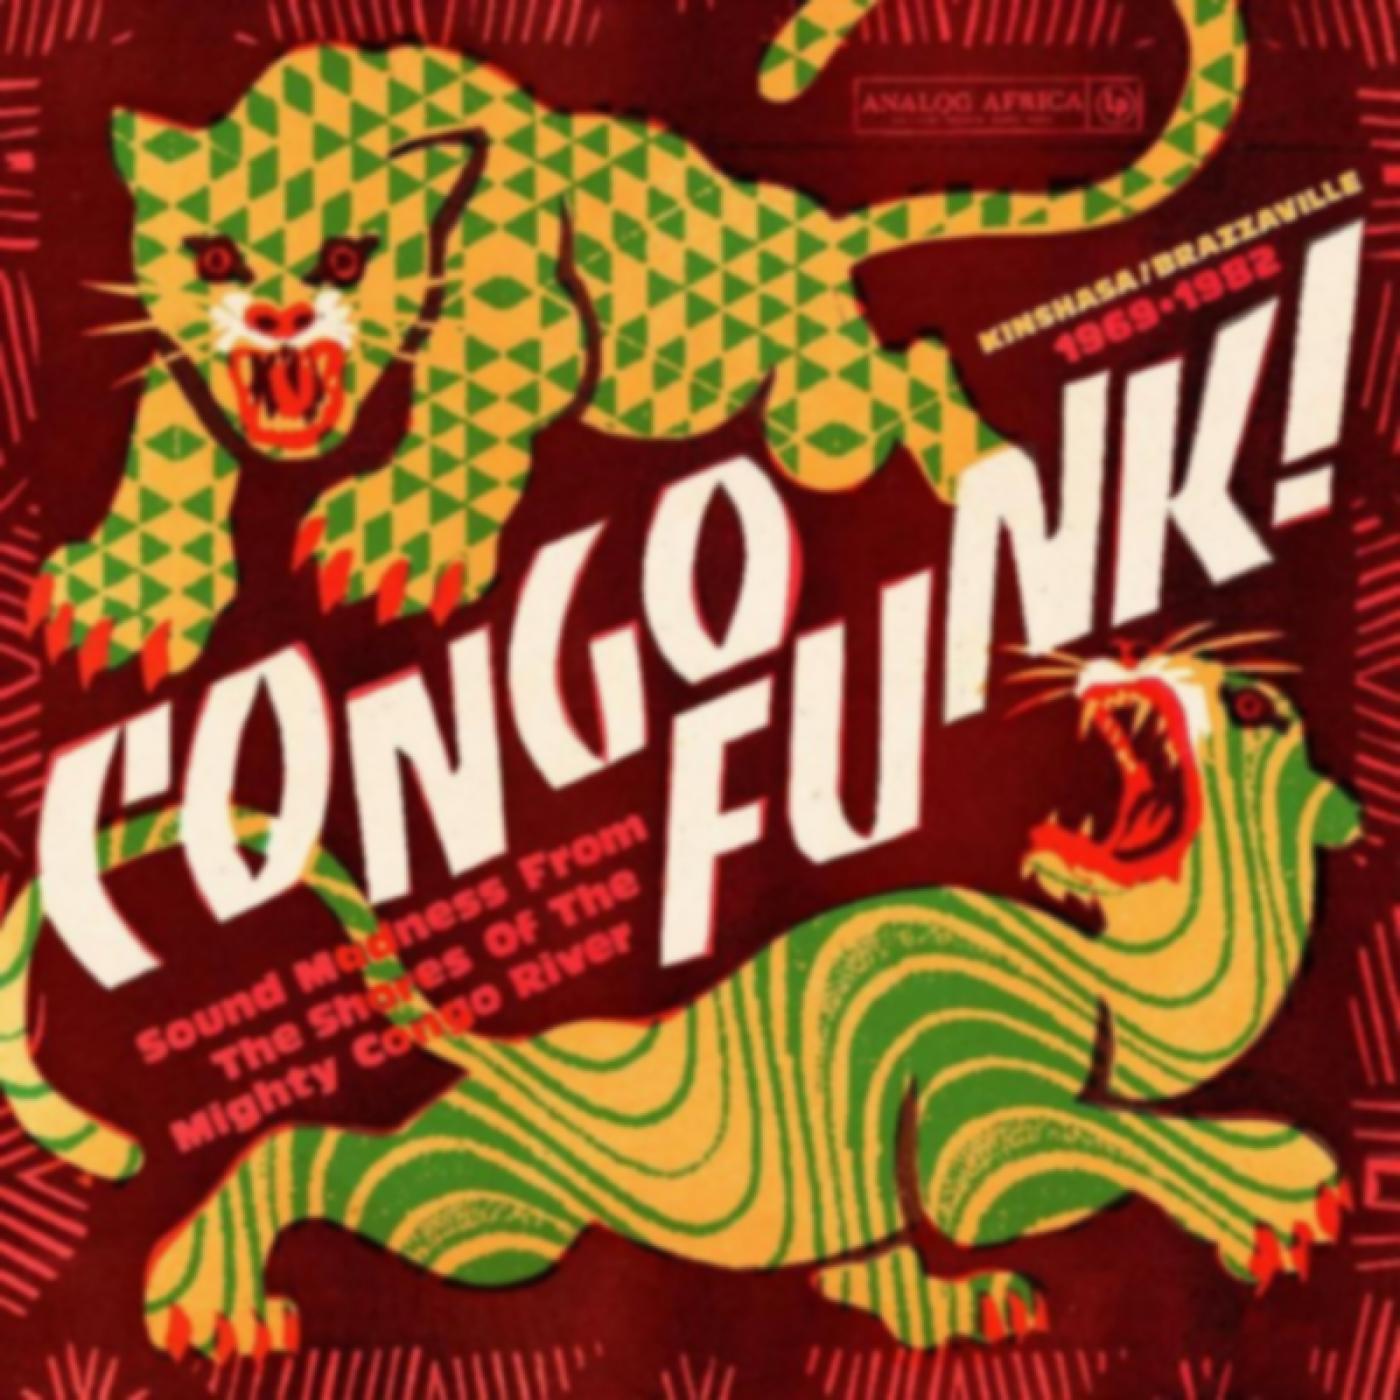 Congo Funk! - Sound Madness From The Shores Of The Mighty Congo River (Kinshasa/Brazzaville 1969-1982)